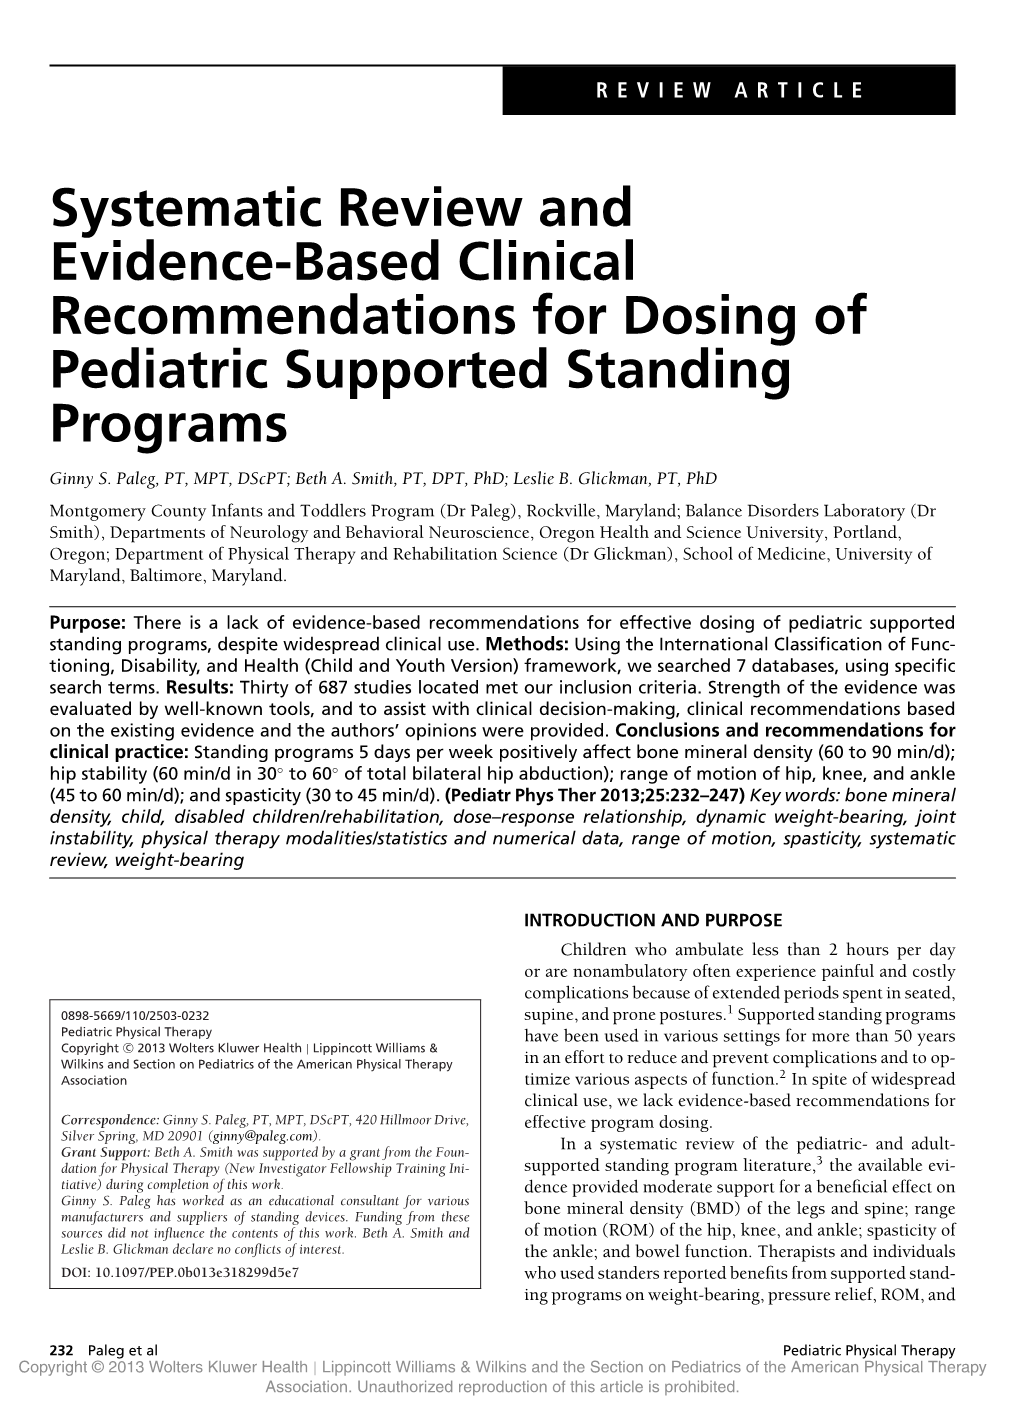 Systematic Review and Evidence-Based Clinical Recommendations for Dosing of Pediatric Supported Standing Programs Ginny S